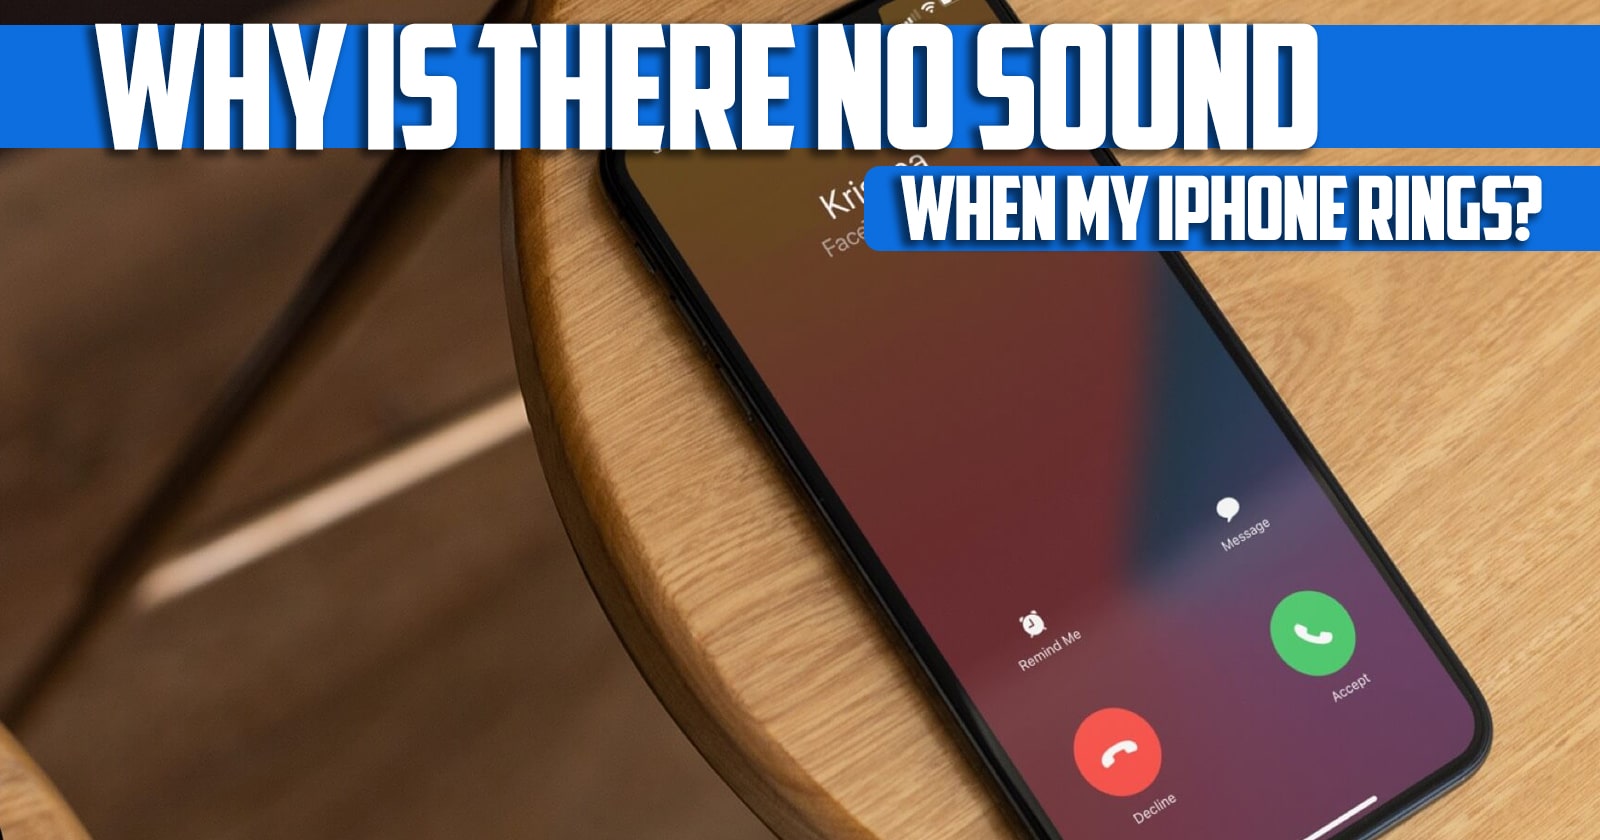 Why is there no sound when my iPhone rings?